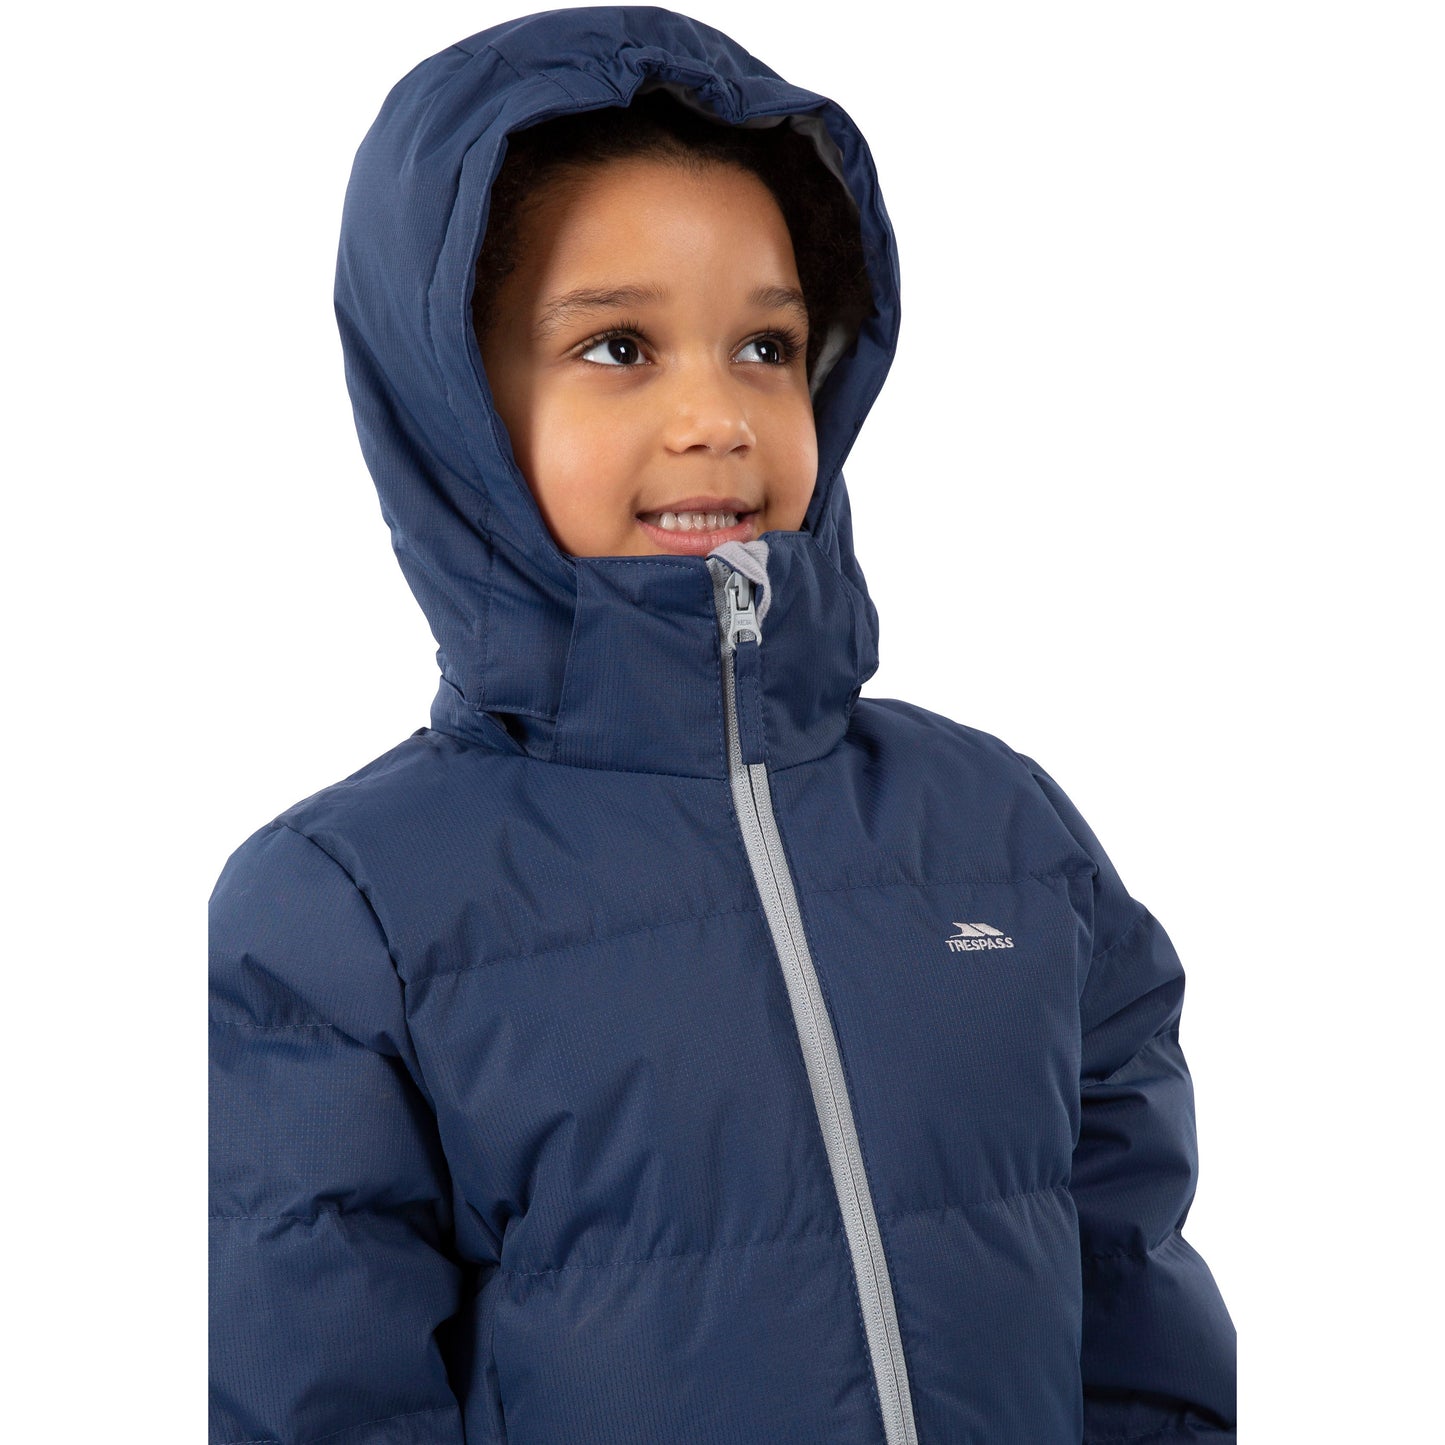 Tiffy Girls Padded Casual Jacket in Navy Tone